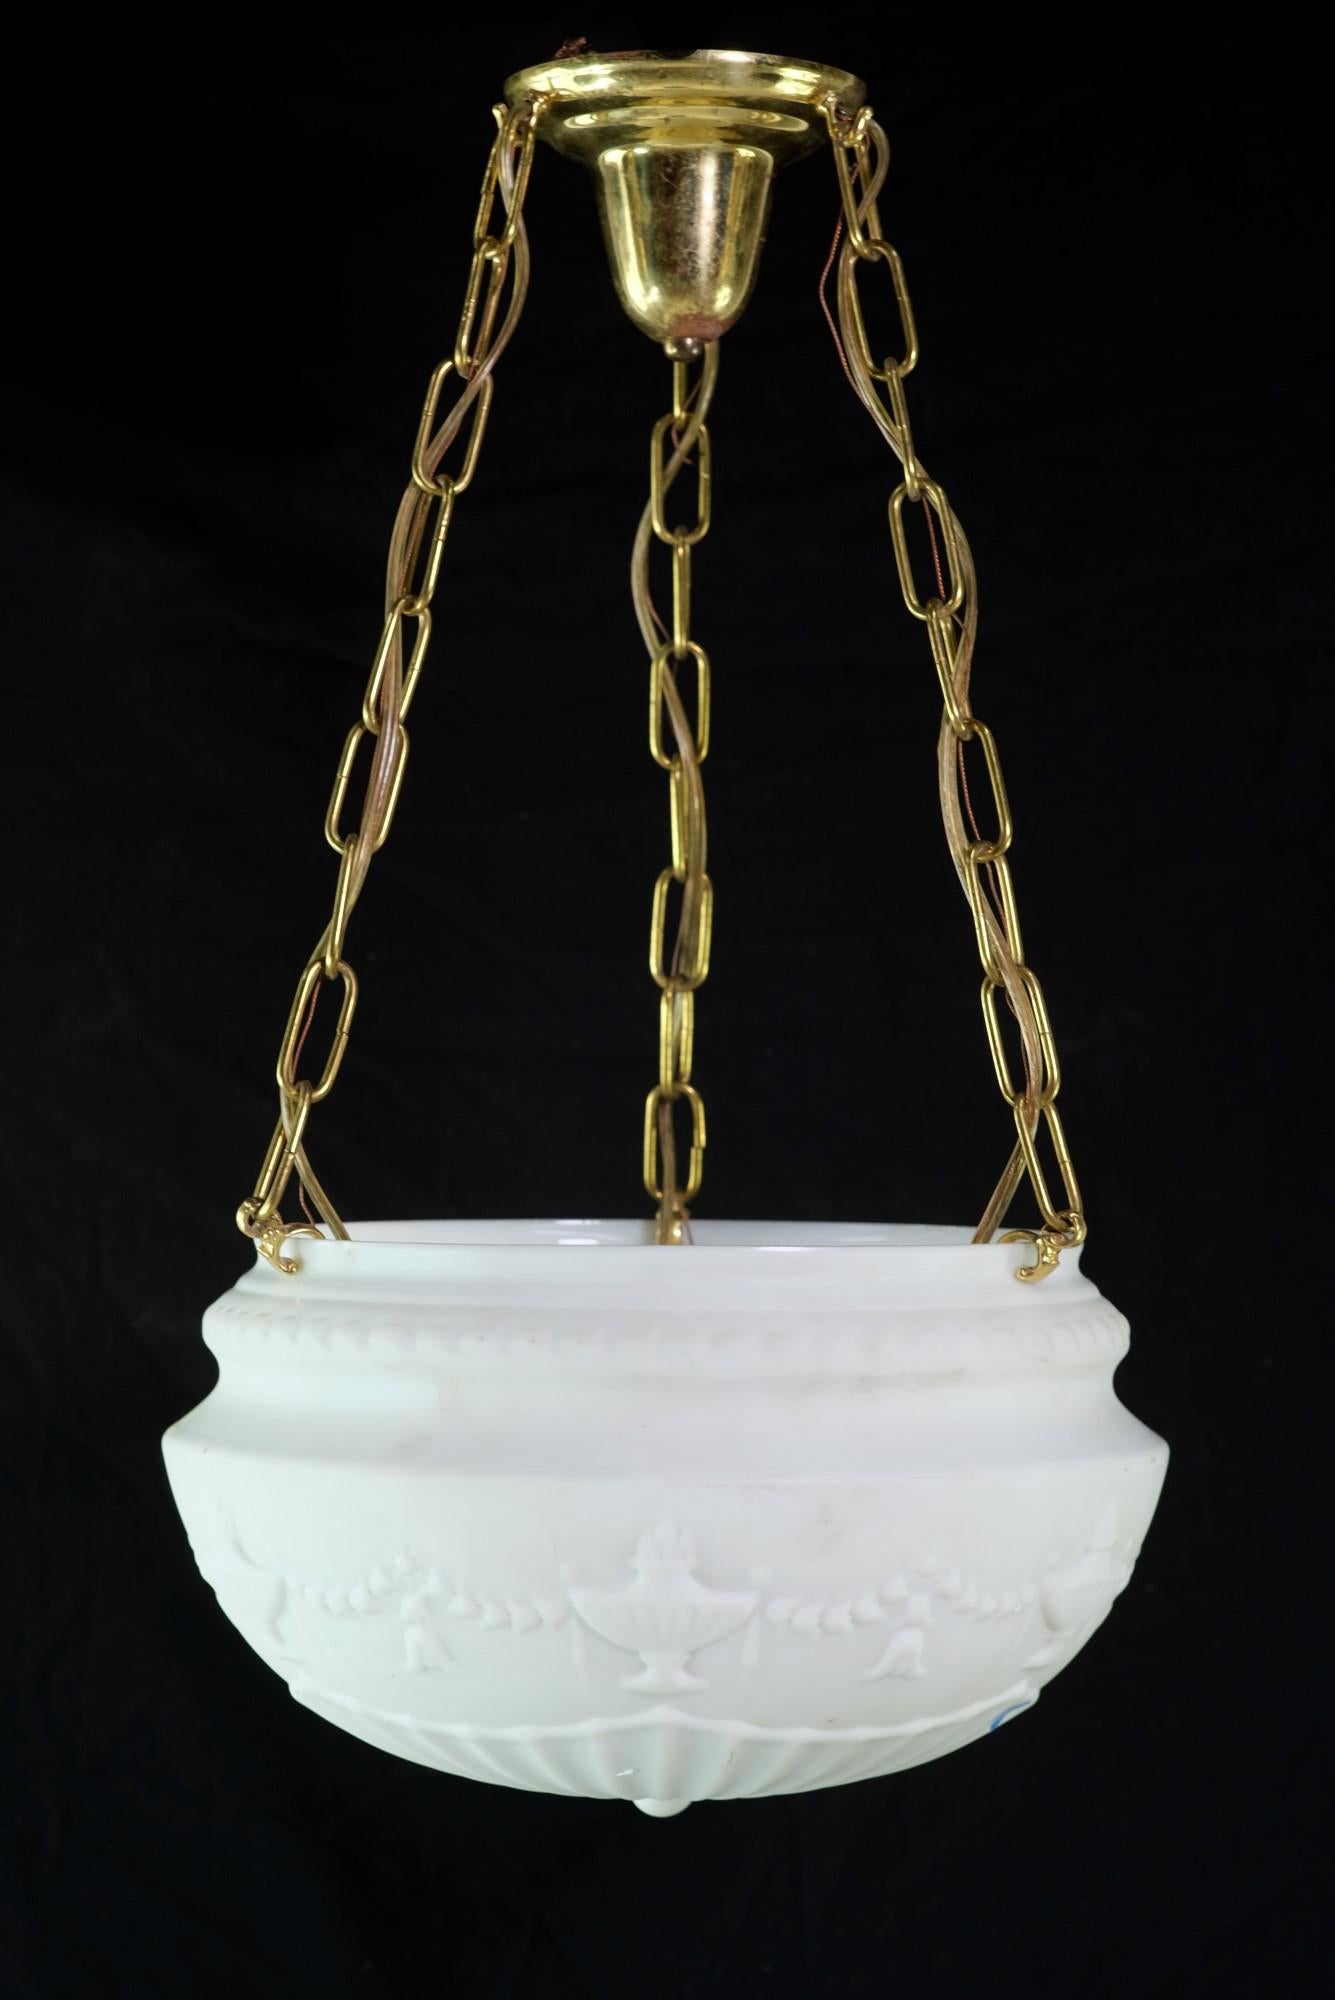 Antique fluted milk glass dish light detailed with embossed urns and tulip swag details. The polished brass hardware features a canopy with three wired chains supporting the dish light. The price includes restoration. This can be seen at our 400